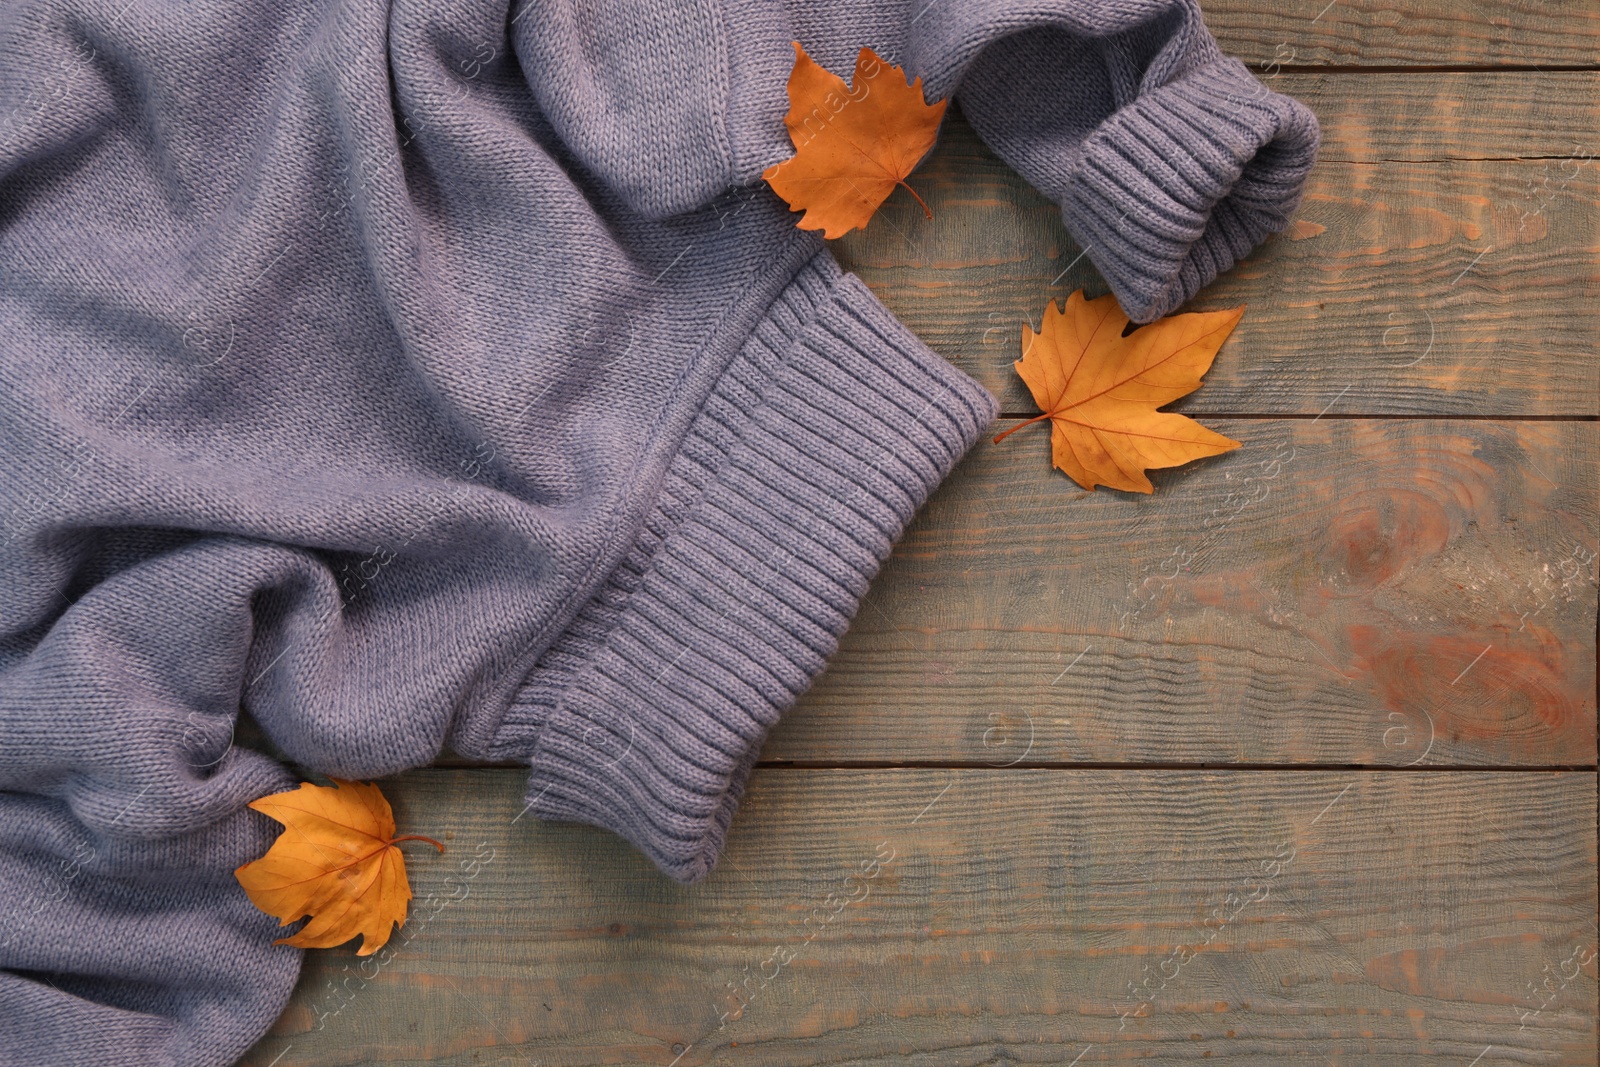 Photo of Warm sweater and dry leaves on blue wooden background, flat lay. Autumn season